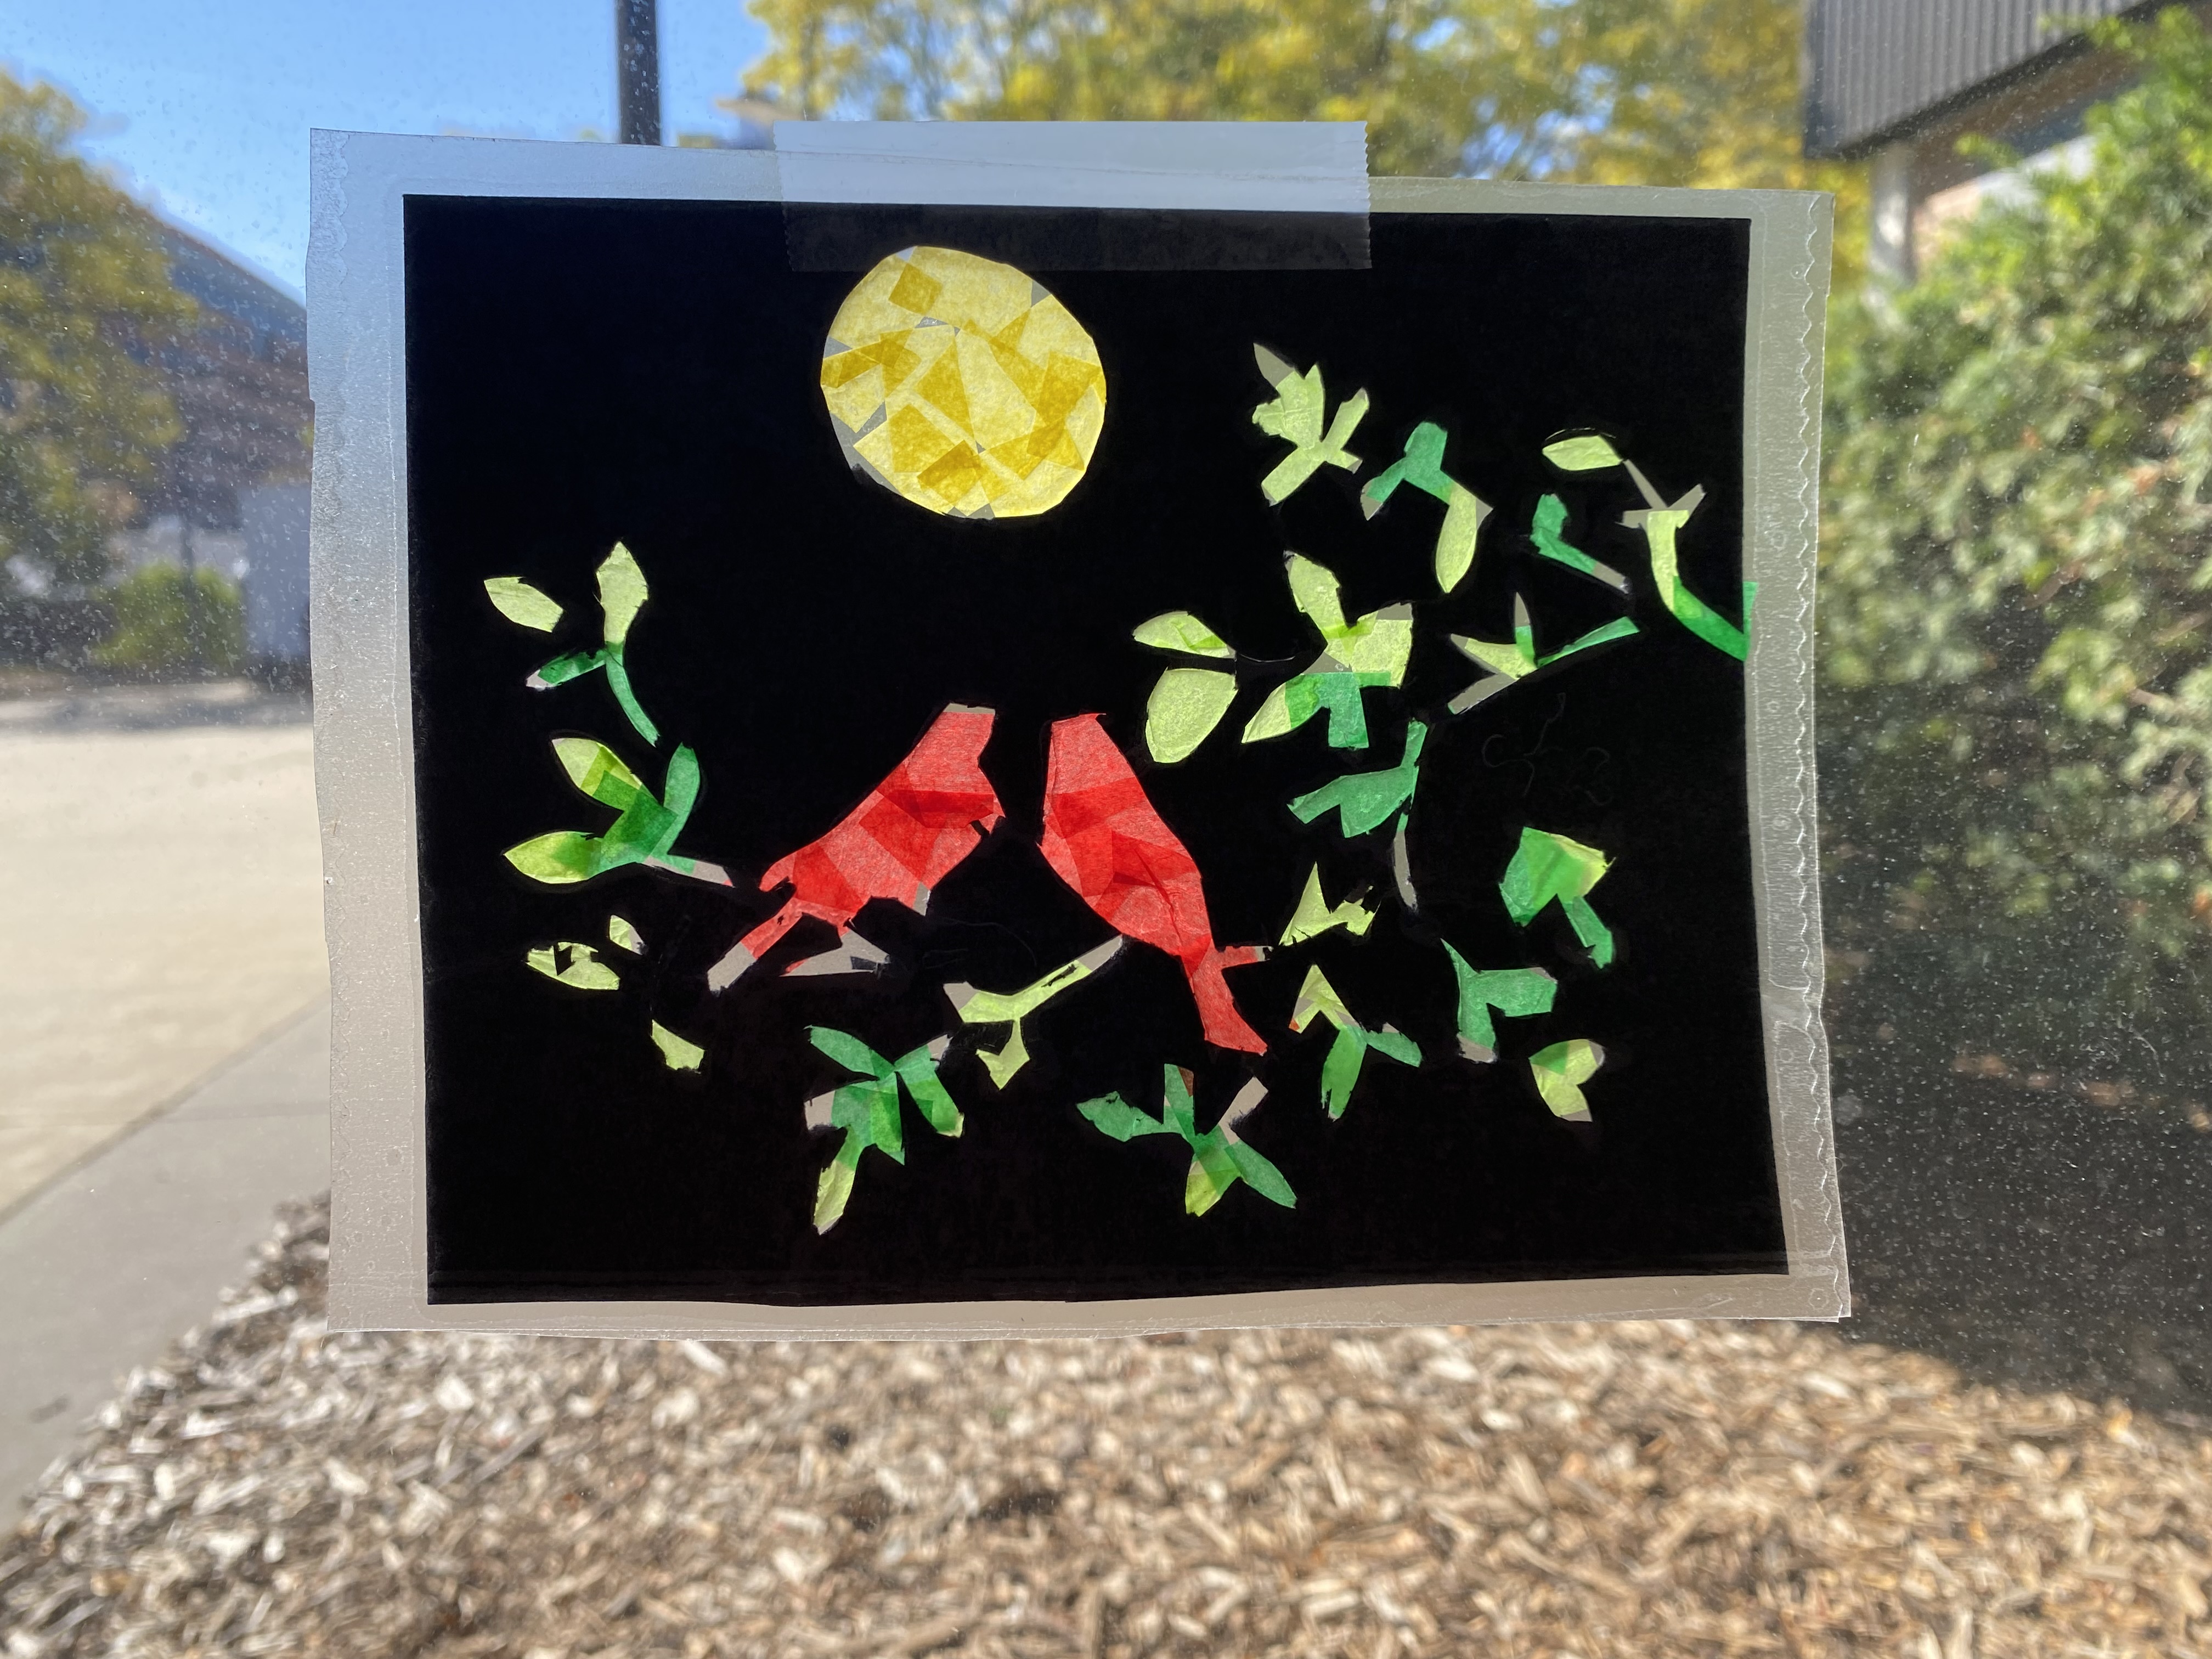 A tissue paper artwork of two red birds among green foliage below a yellow moon against a black background is taped to a window to allow light to pass through its shapes